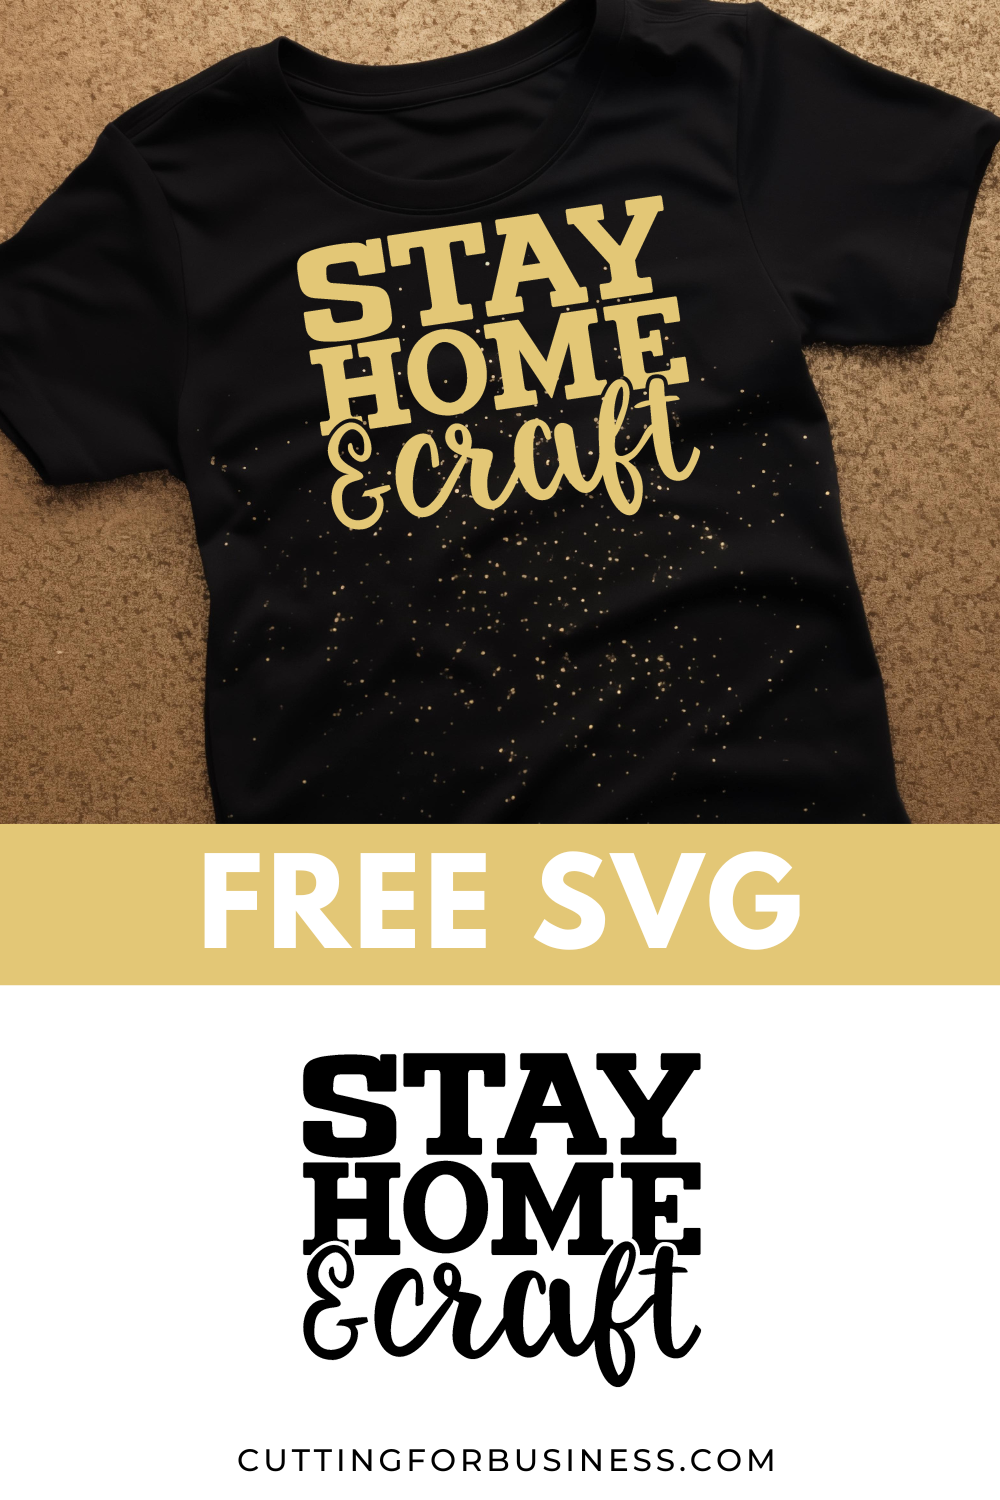 Free SVG Stay Home & Craft - cuttingforbusiness.com.